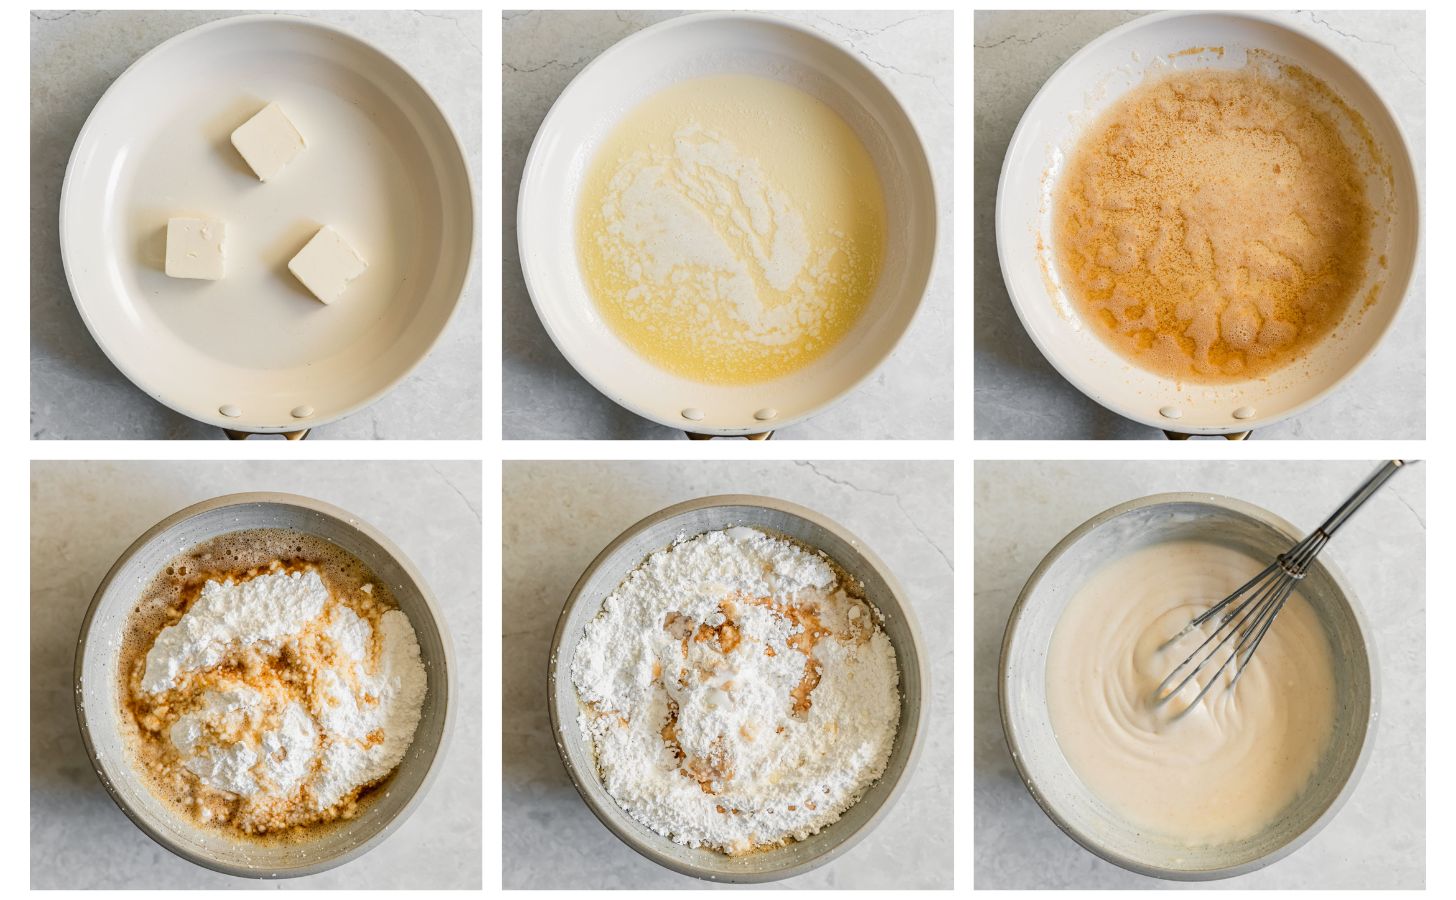 Six steps to making brown butter icing. In photo 1, butter is in a white pan on a white counter. In photo 2, the butter is melted. In photo 3, the butter is browned. In photo 4, a grey bowl has powdered sugar and brown butter in it. In photo 5, the bowl has milk and vanilla in it. In photo 6, the glaze is whisked.